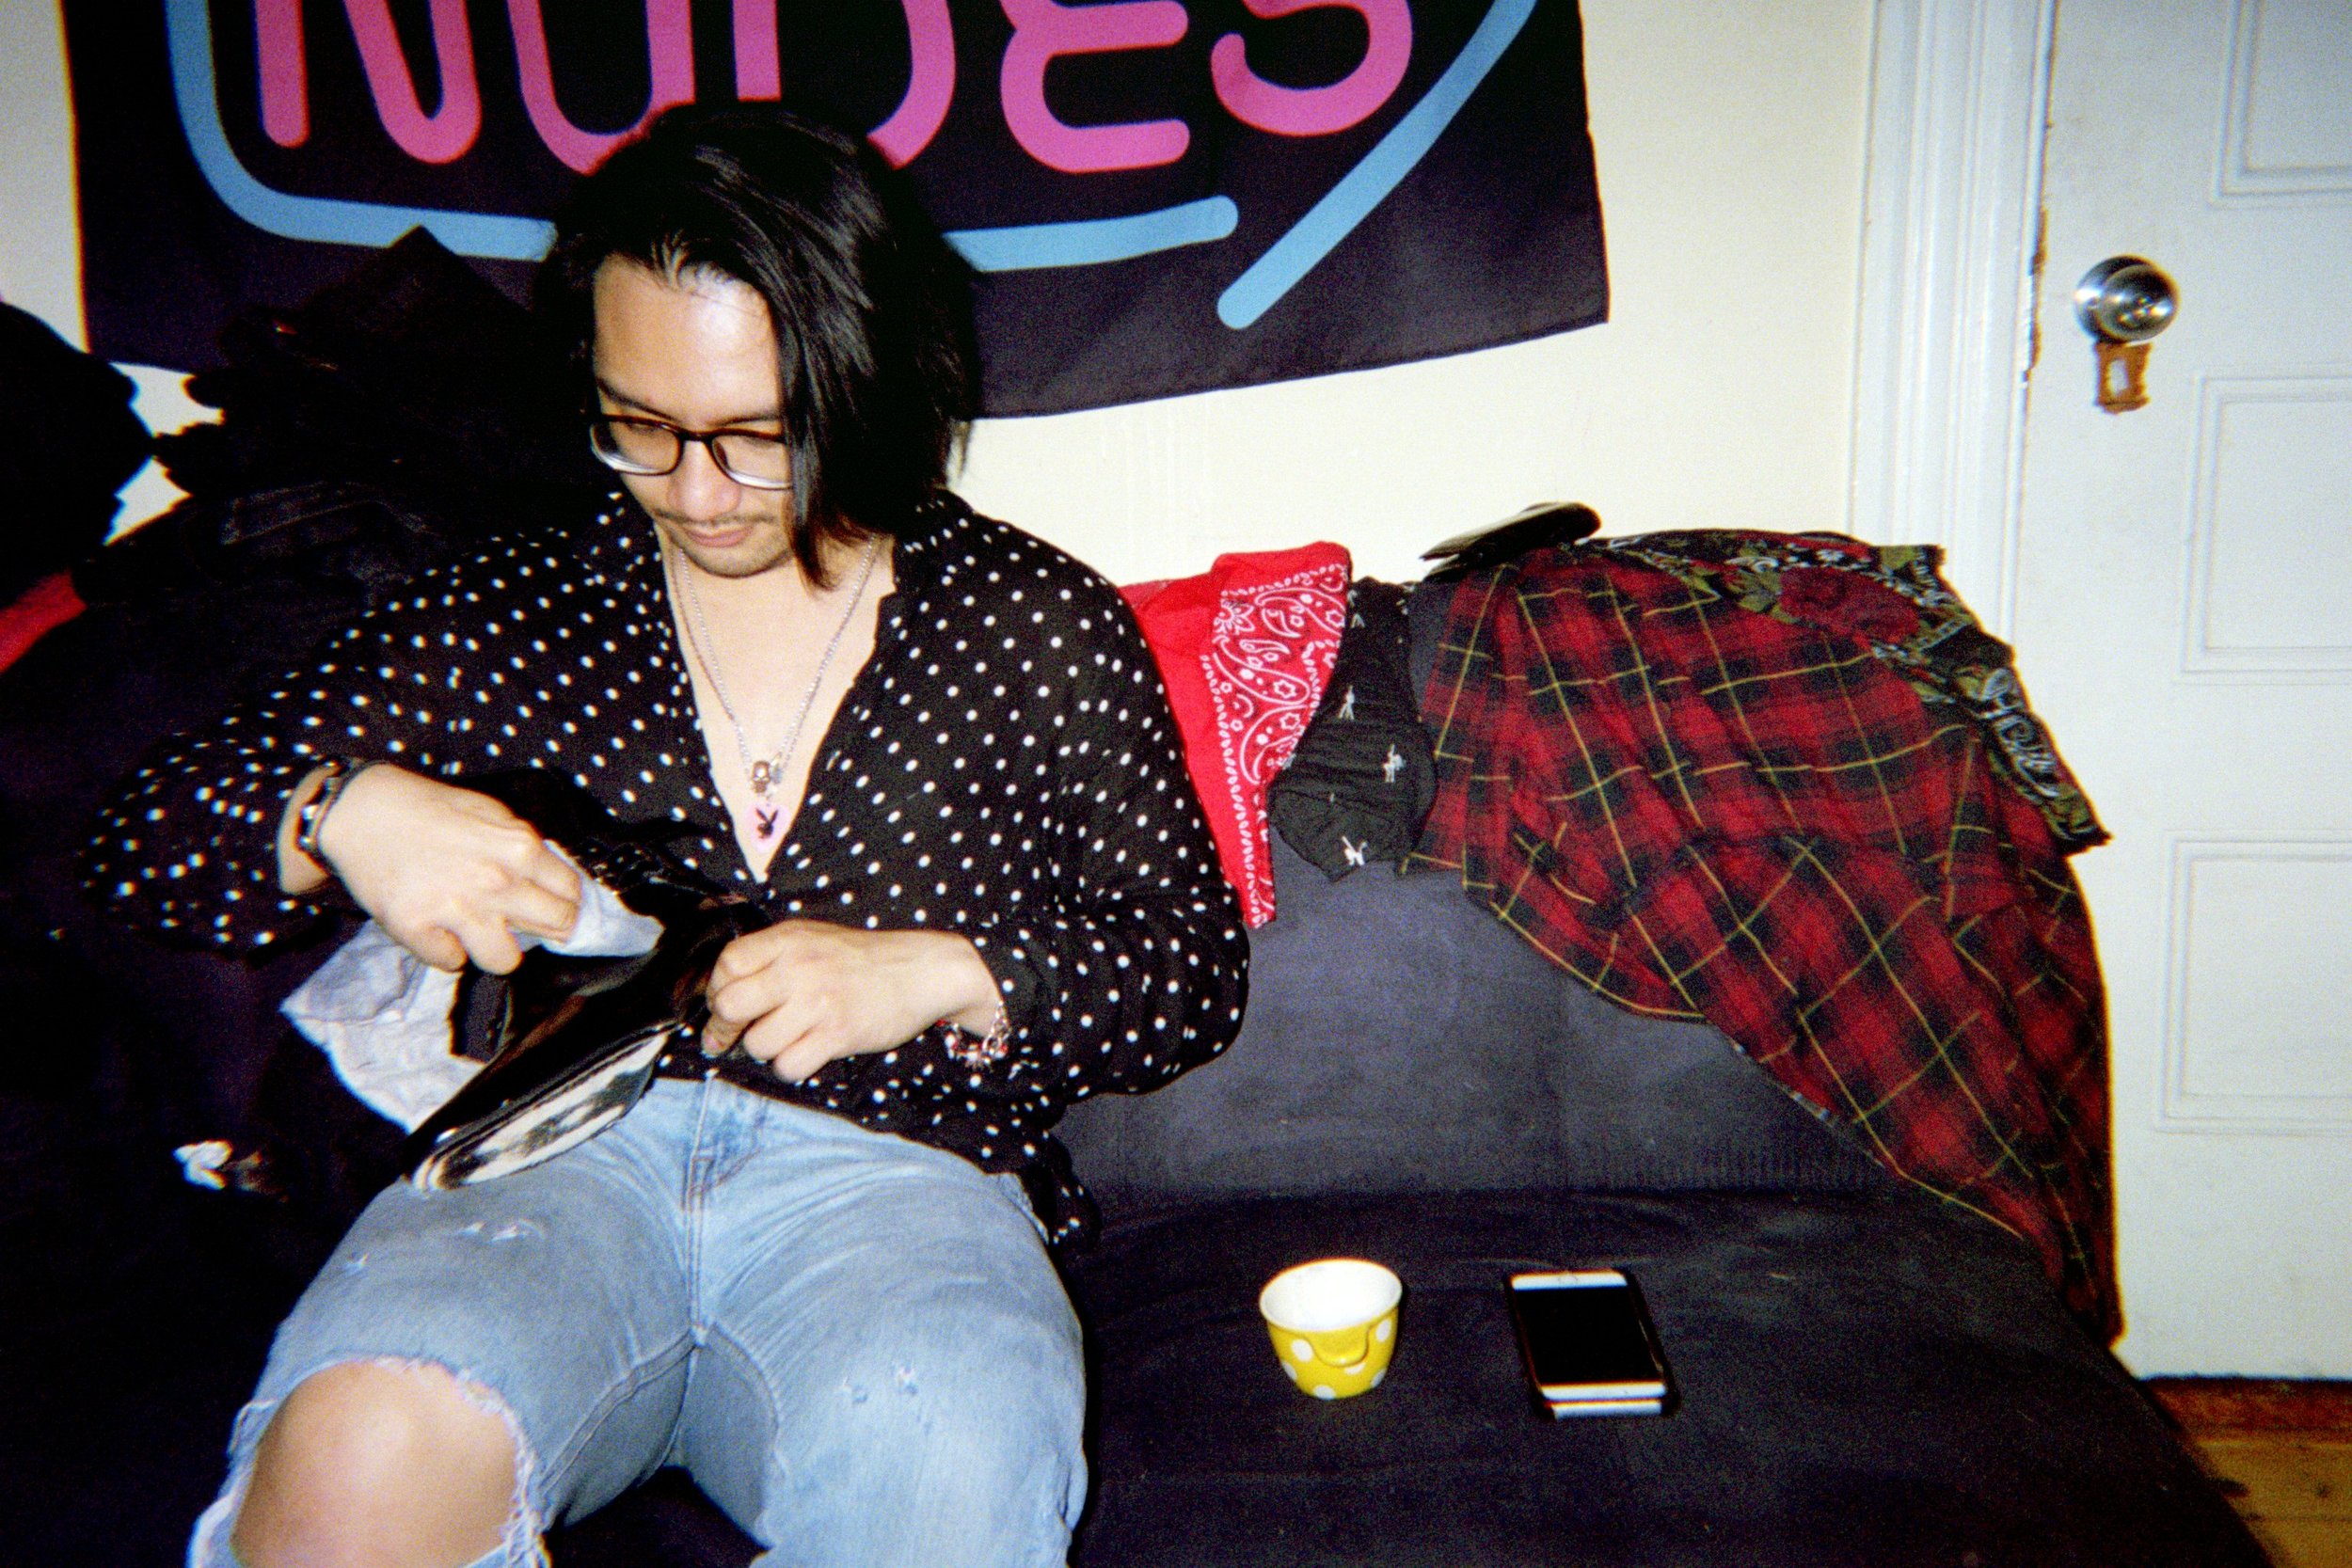 kurt cleaning his shoes